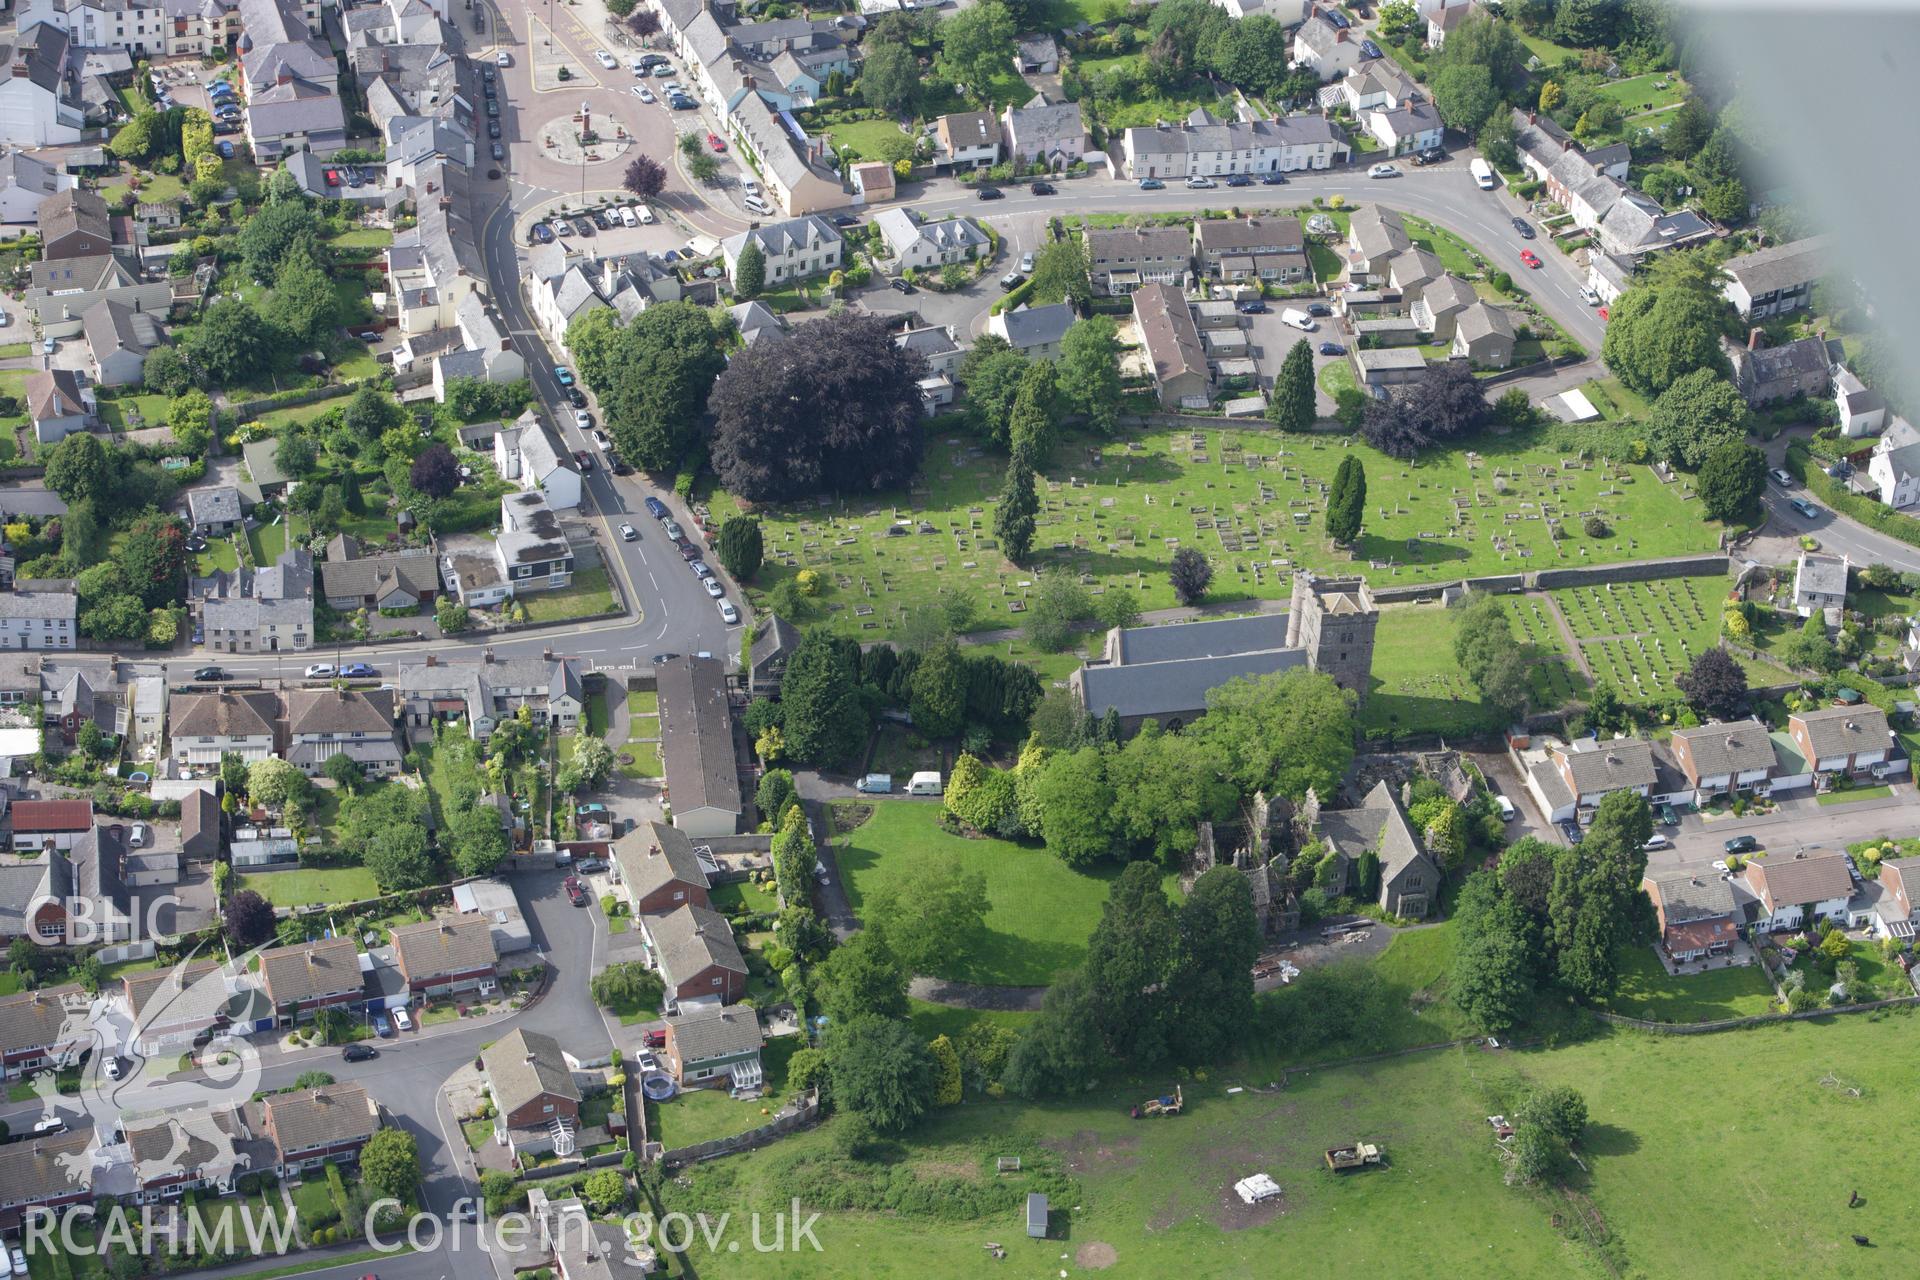 RCAHMW colour oblique aerial photograph of St Mary's Church, Usk. Taken on 11 June 2009 by Toby Driver